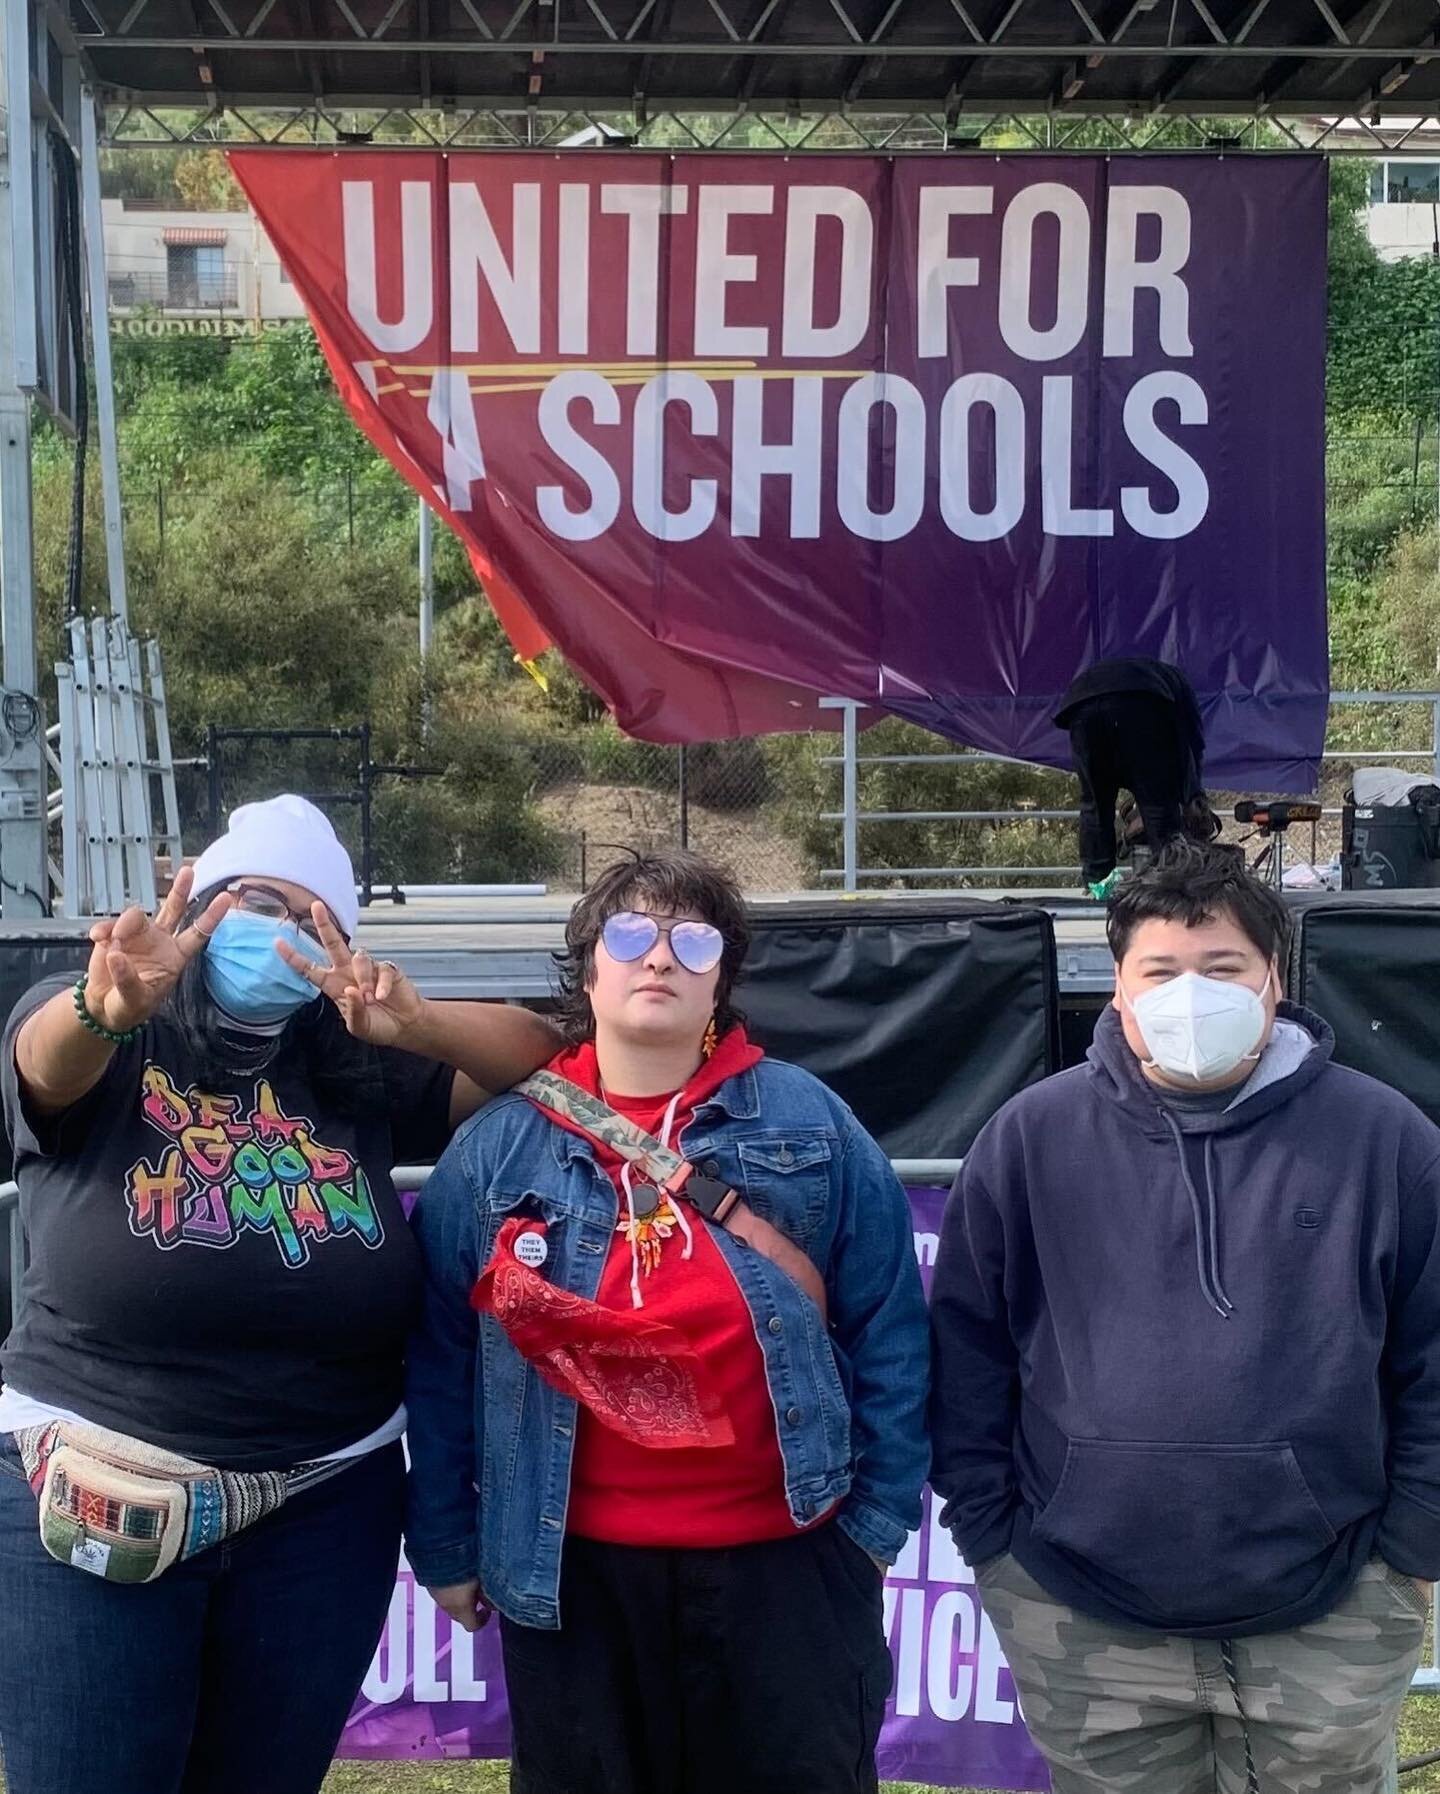 60,000 protestors showed up in DTLA to fight for safe schools and for teachers to get paid livable wages. As a result, wages increased 30%. This shows you how coming together as a community to protest does shift positive change. Thank you to everyone